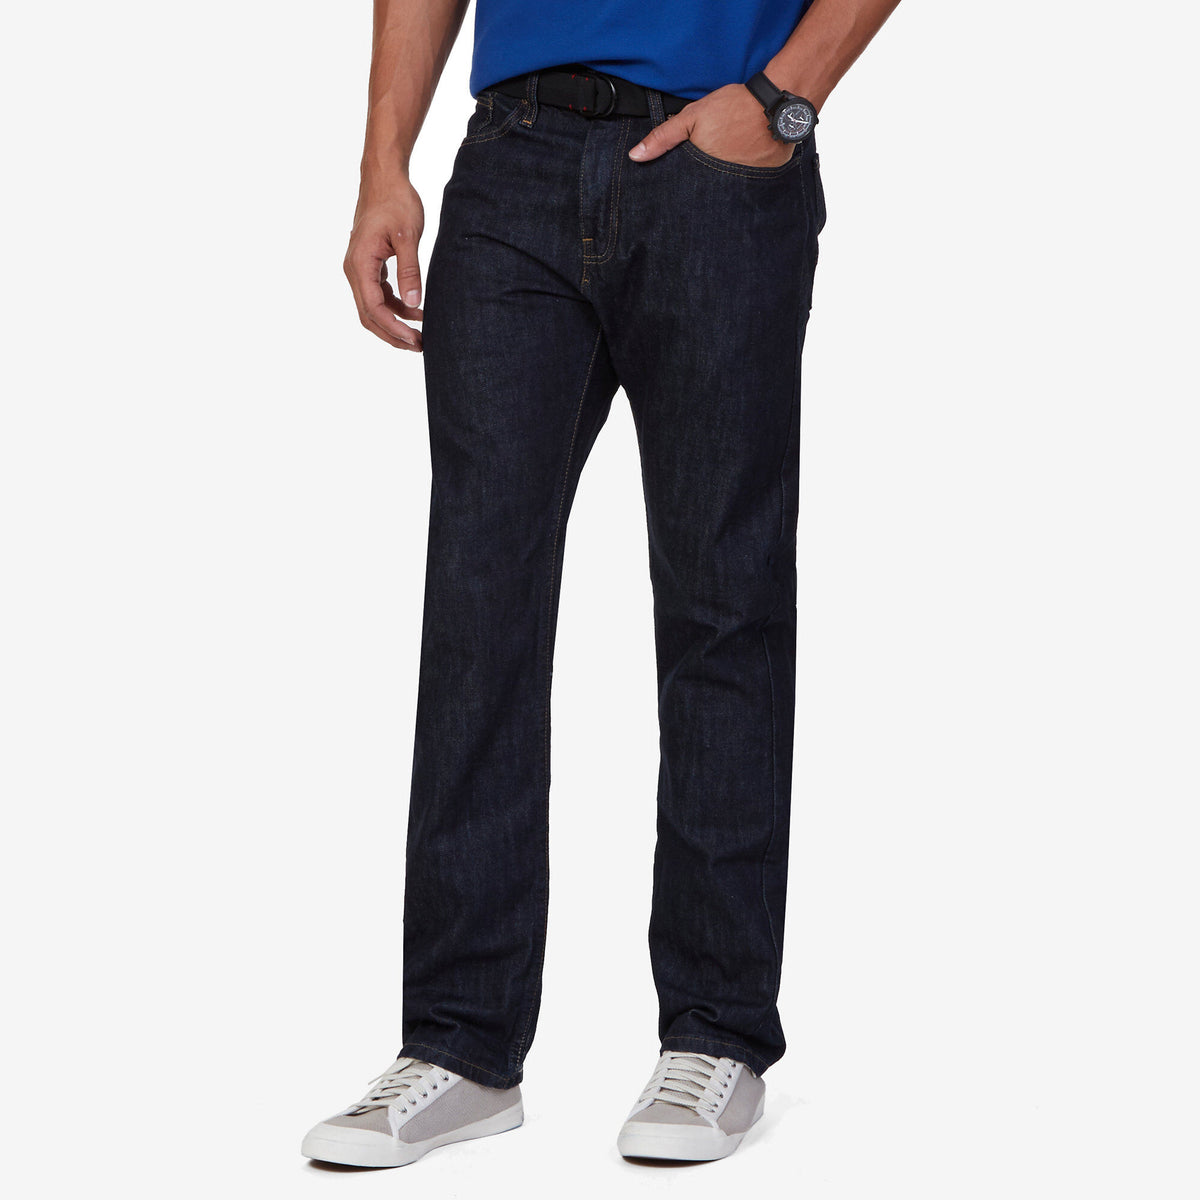 Nautica Men's Big & Tall Relaxed Fit Jeans Marine Wash